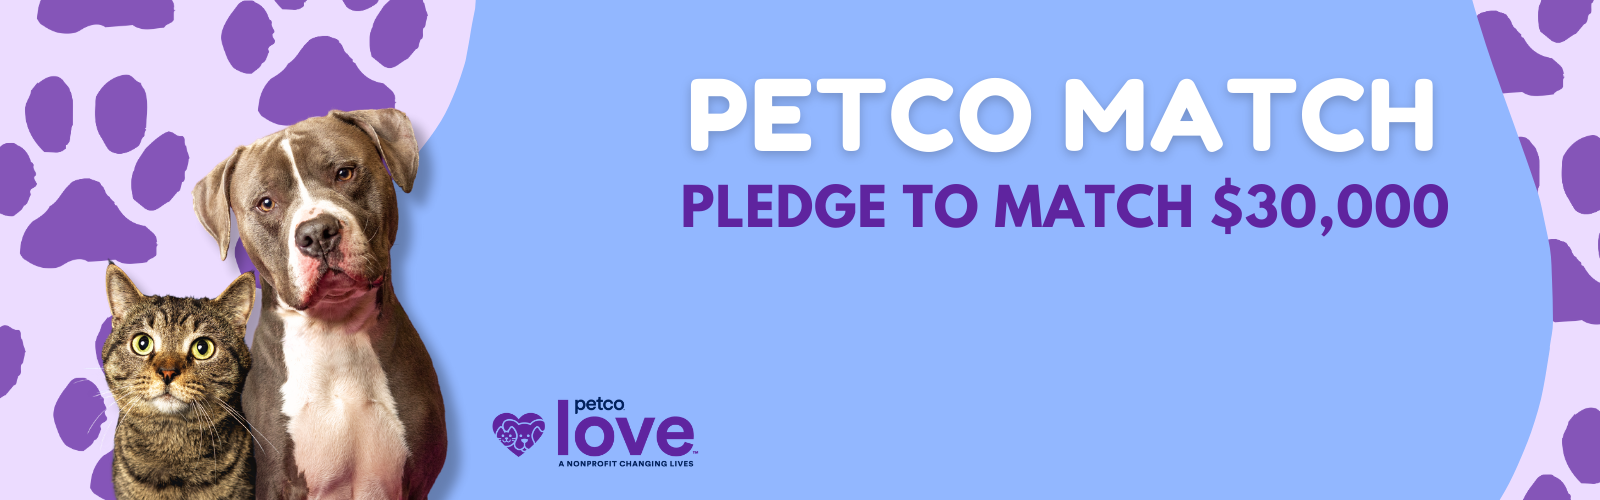 Petco Love Matching Project